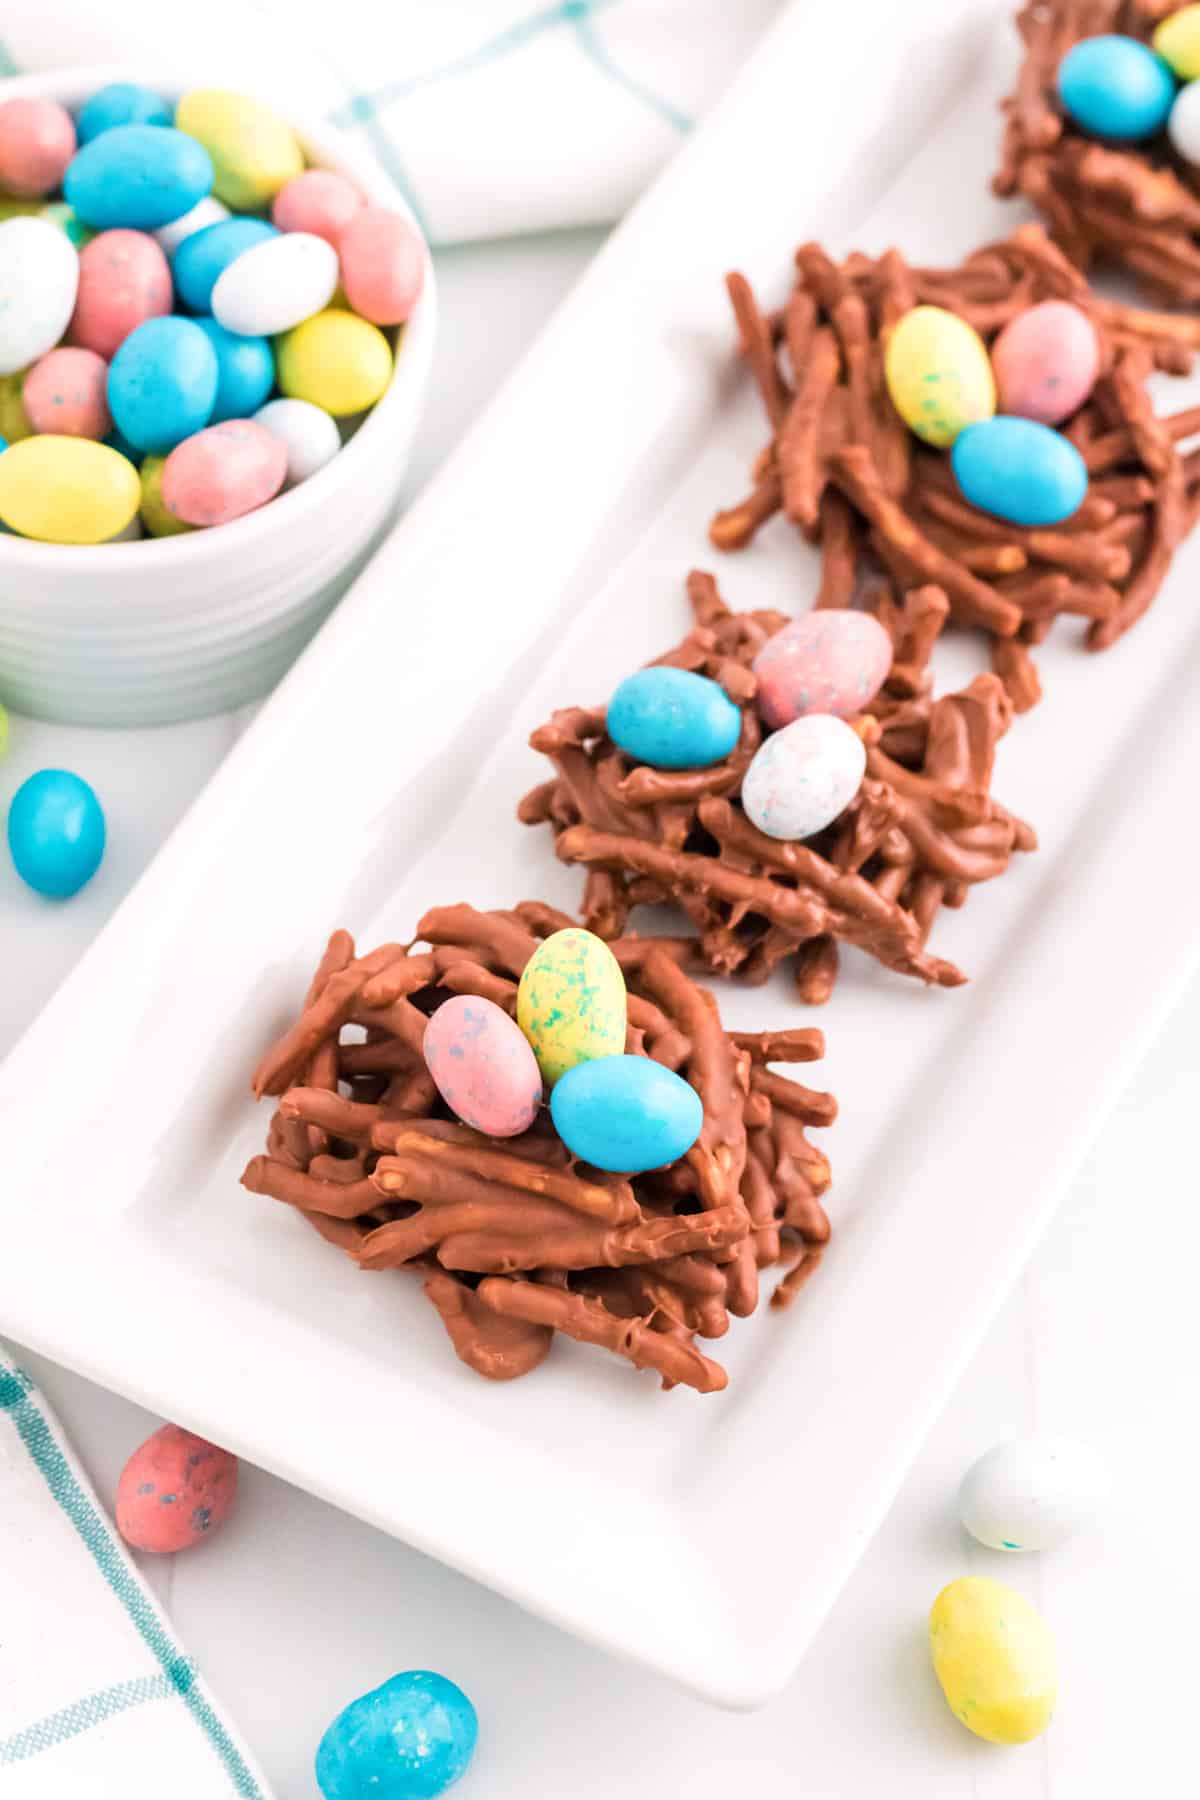 Birds Nest Haystacks with colorful chocolate eggs.